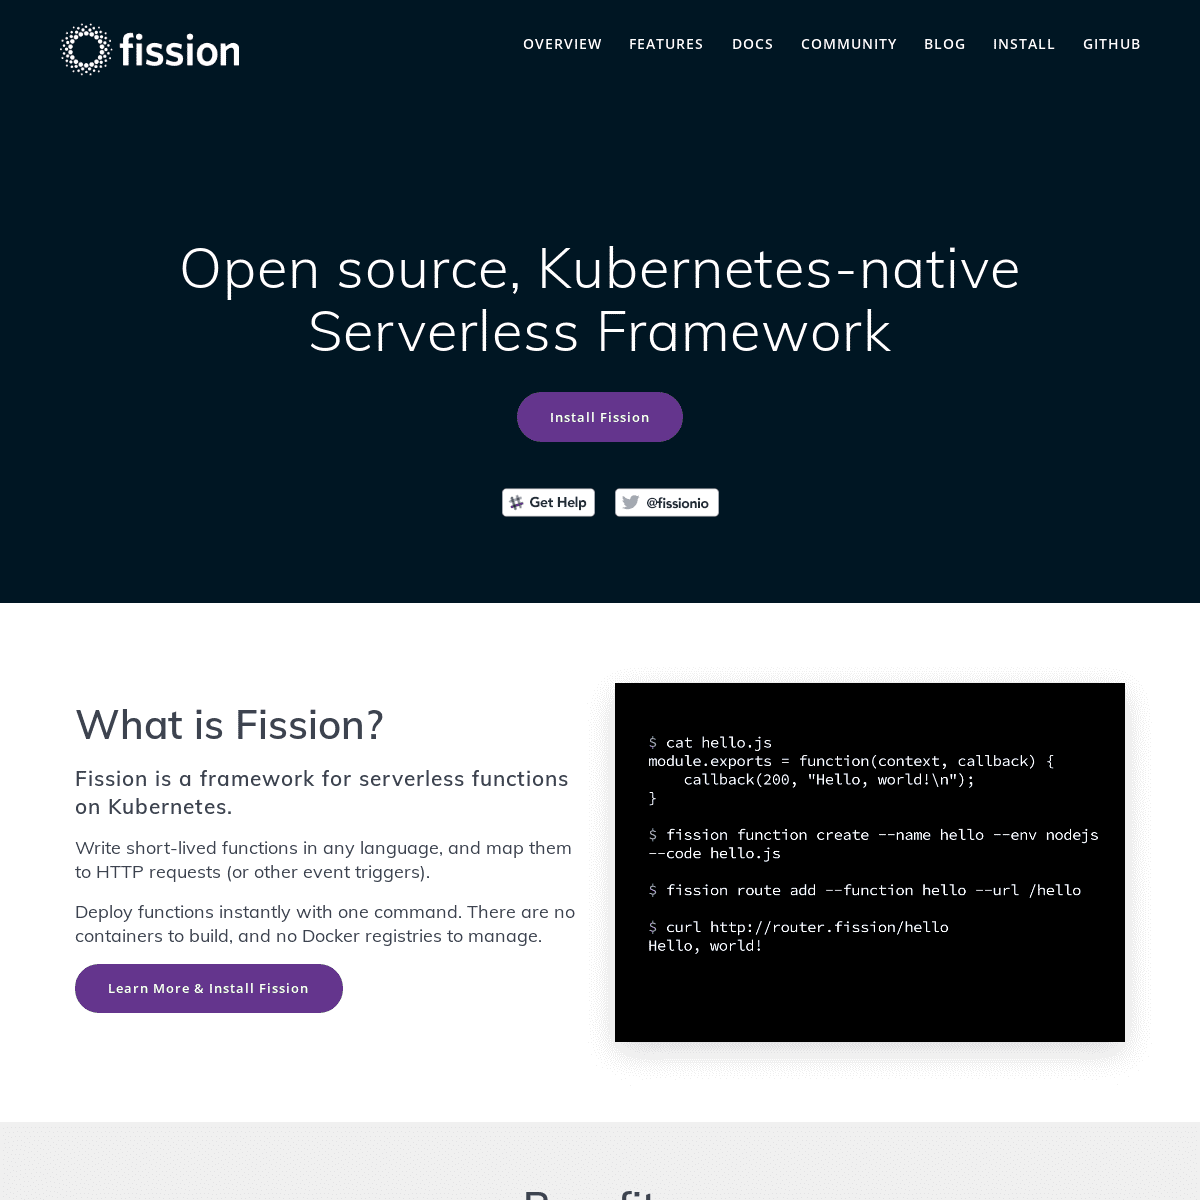 A complete backup of https://fission.io